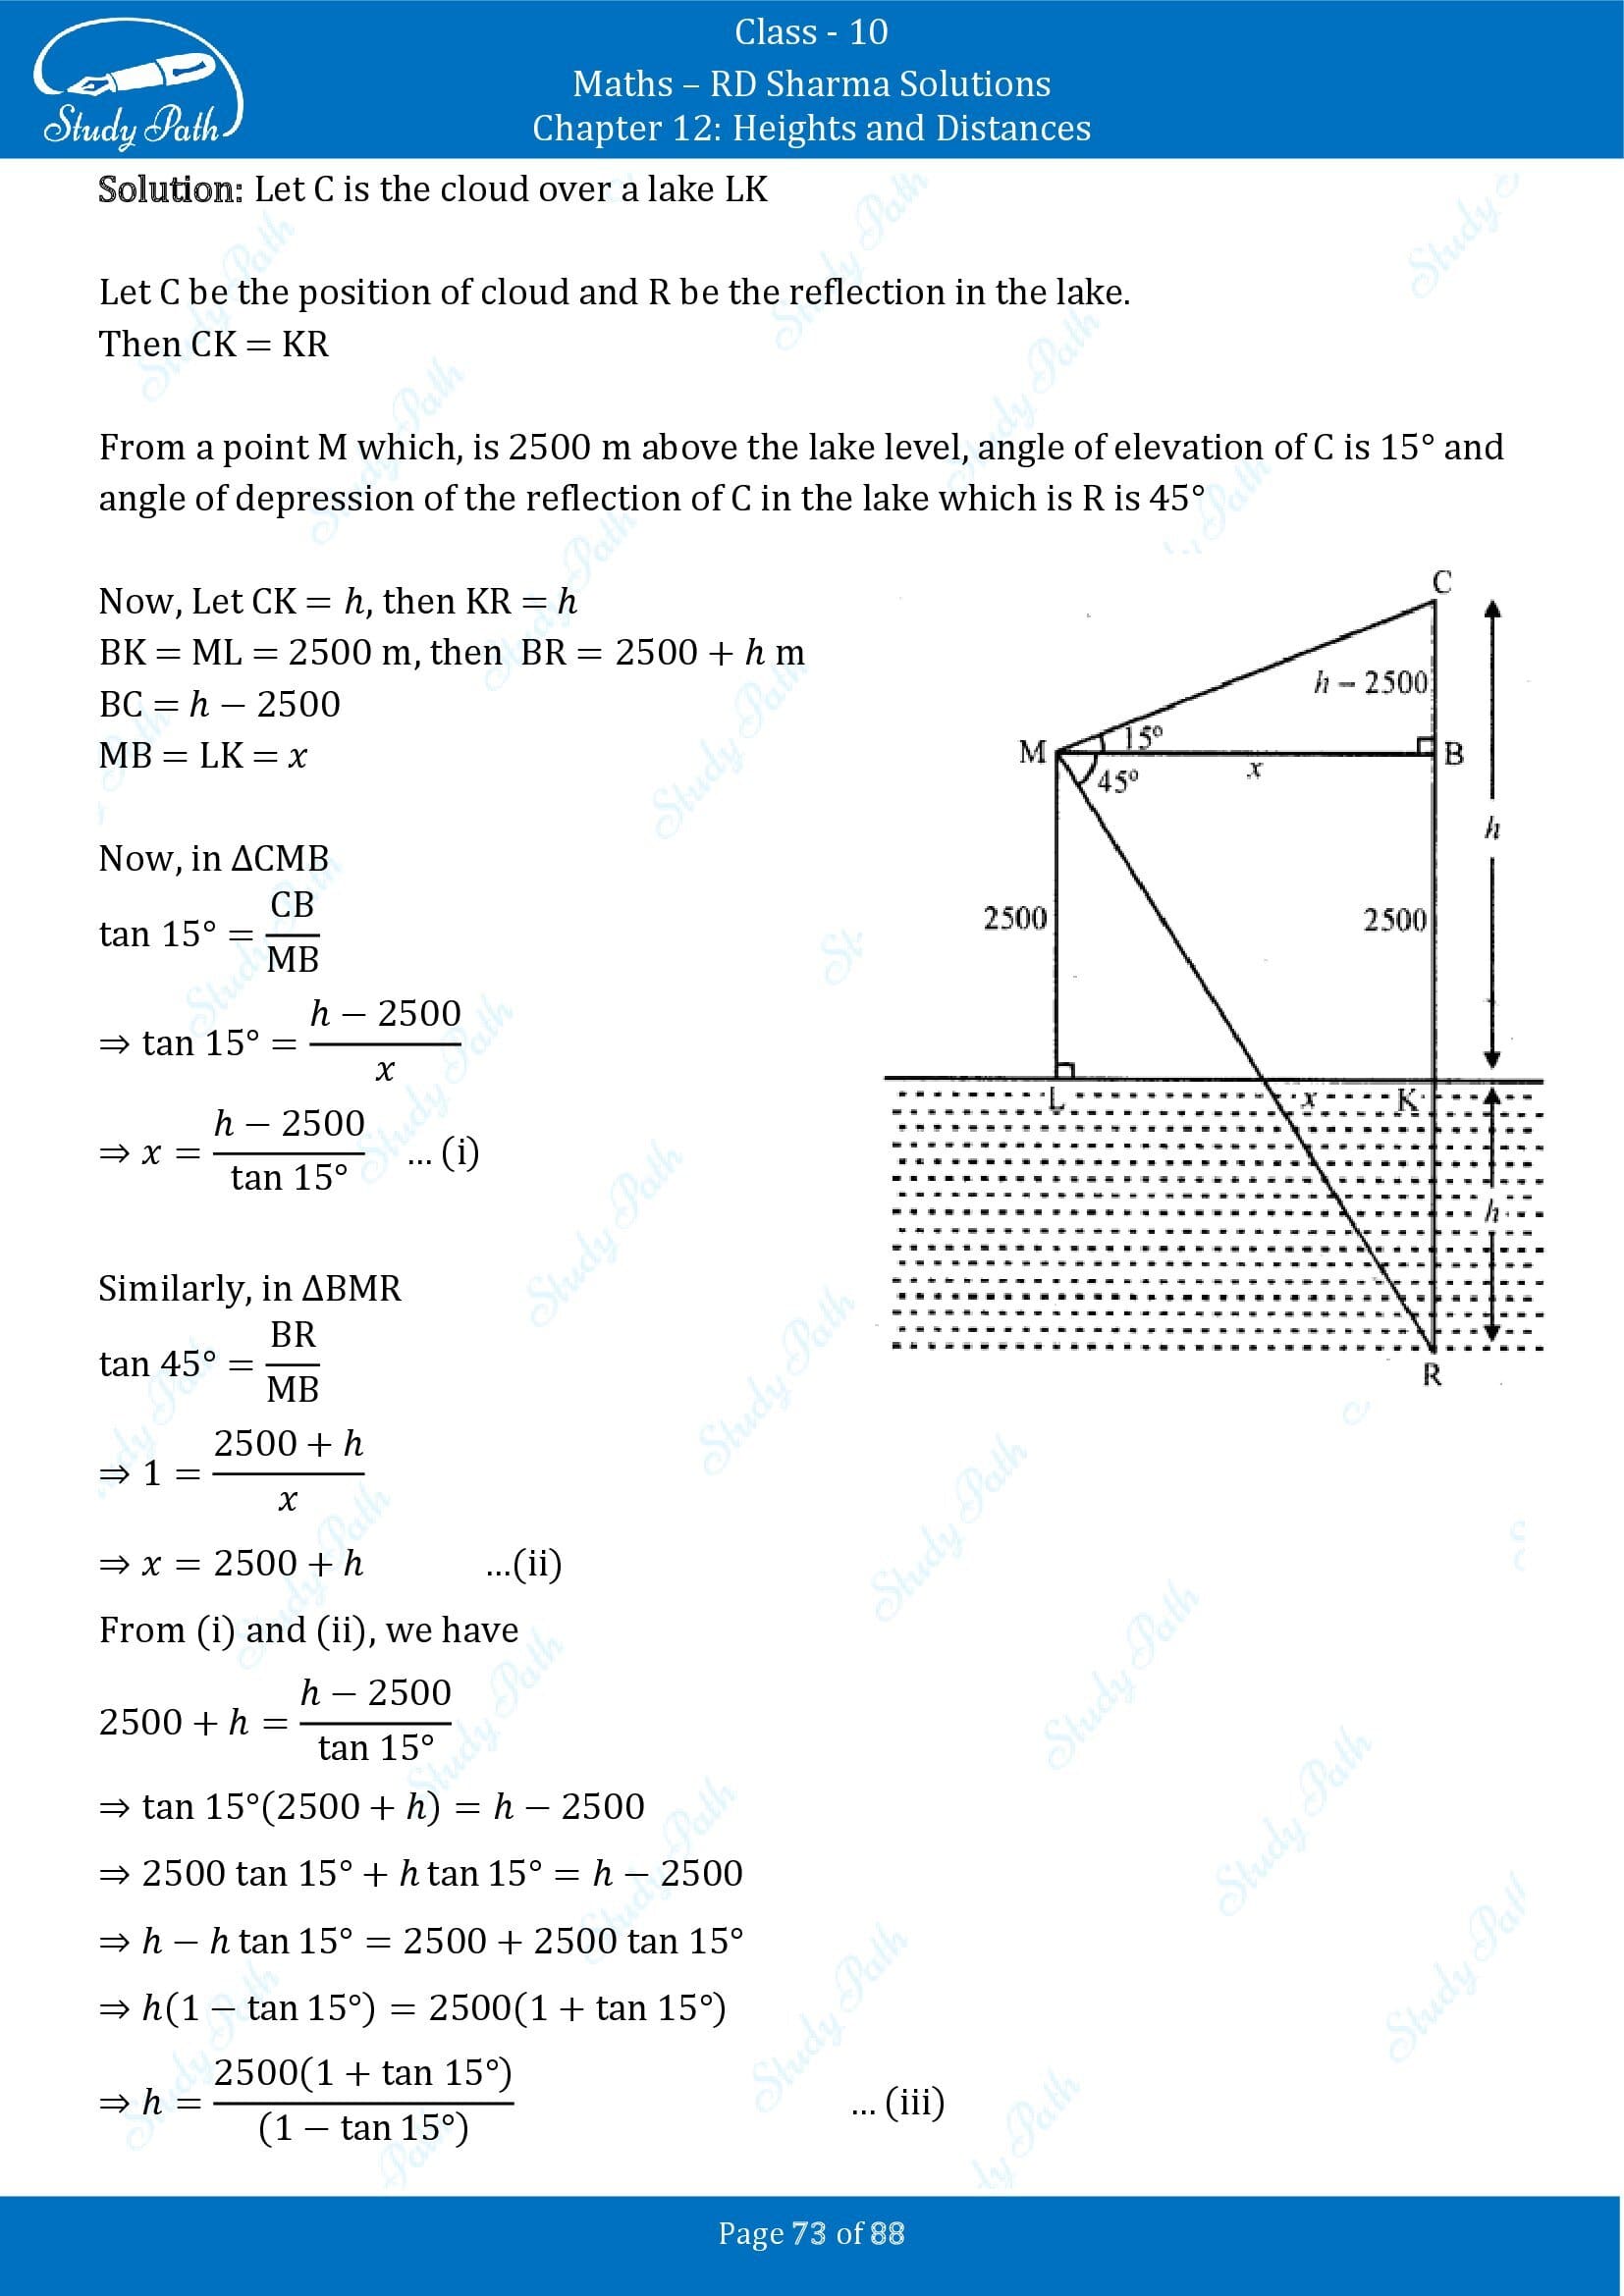 RD Sharma Solutions Class 10 Chapter 12 Heights and Distances Exercise 12.1 00073